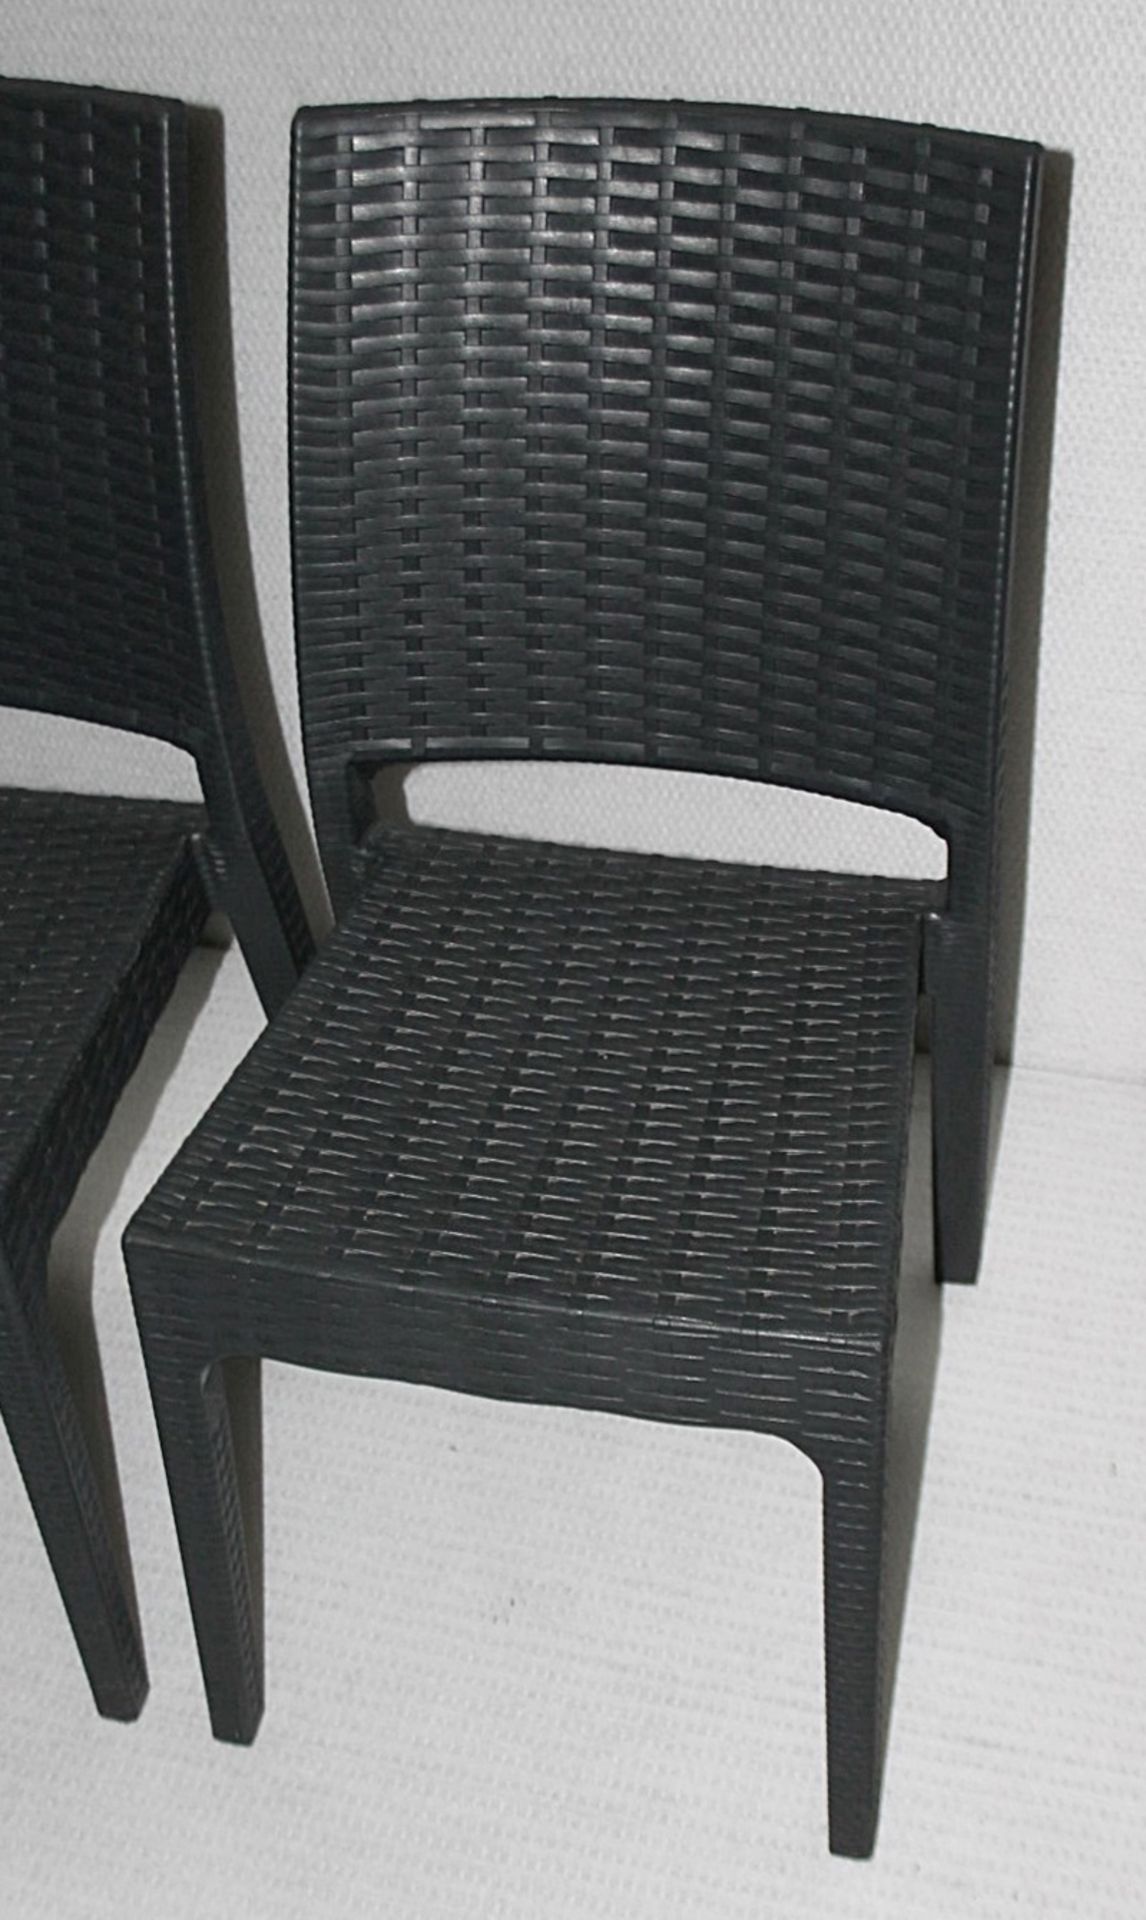 4 x Siesta 'Florida' Rattan Style Garden Chairs In Dark Grey - Suitable For Commercial or Home Use - - Image 13 of 21